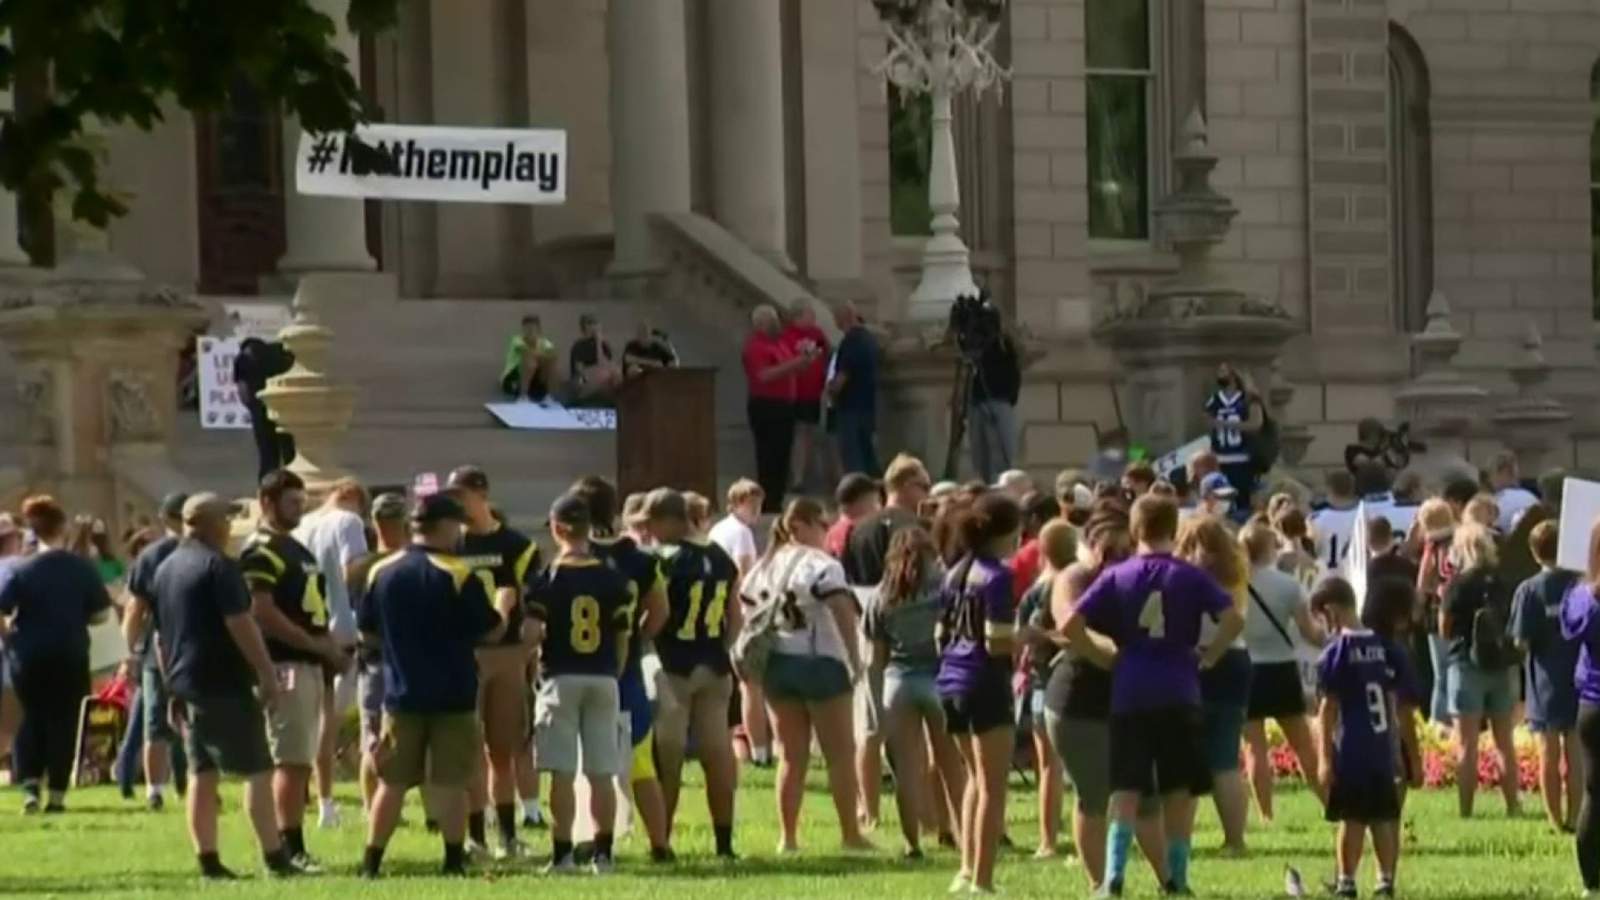 Protesters gather outside Michigan Capitol for Let Them Play rally aimed at allowing high school sports